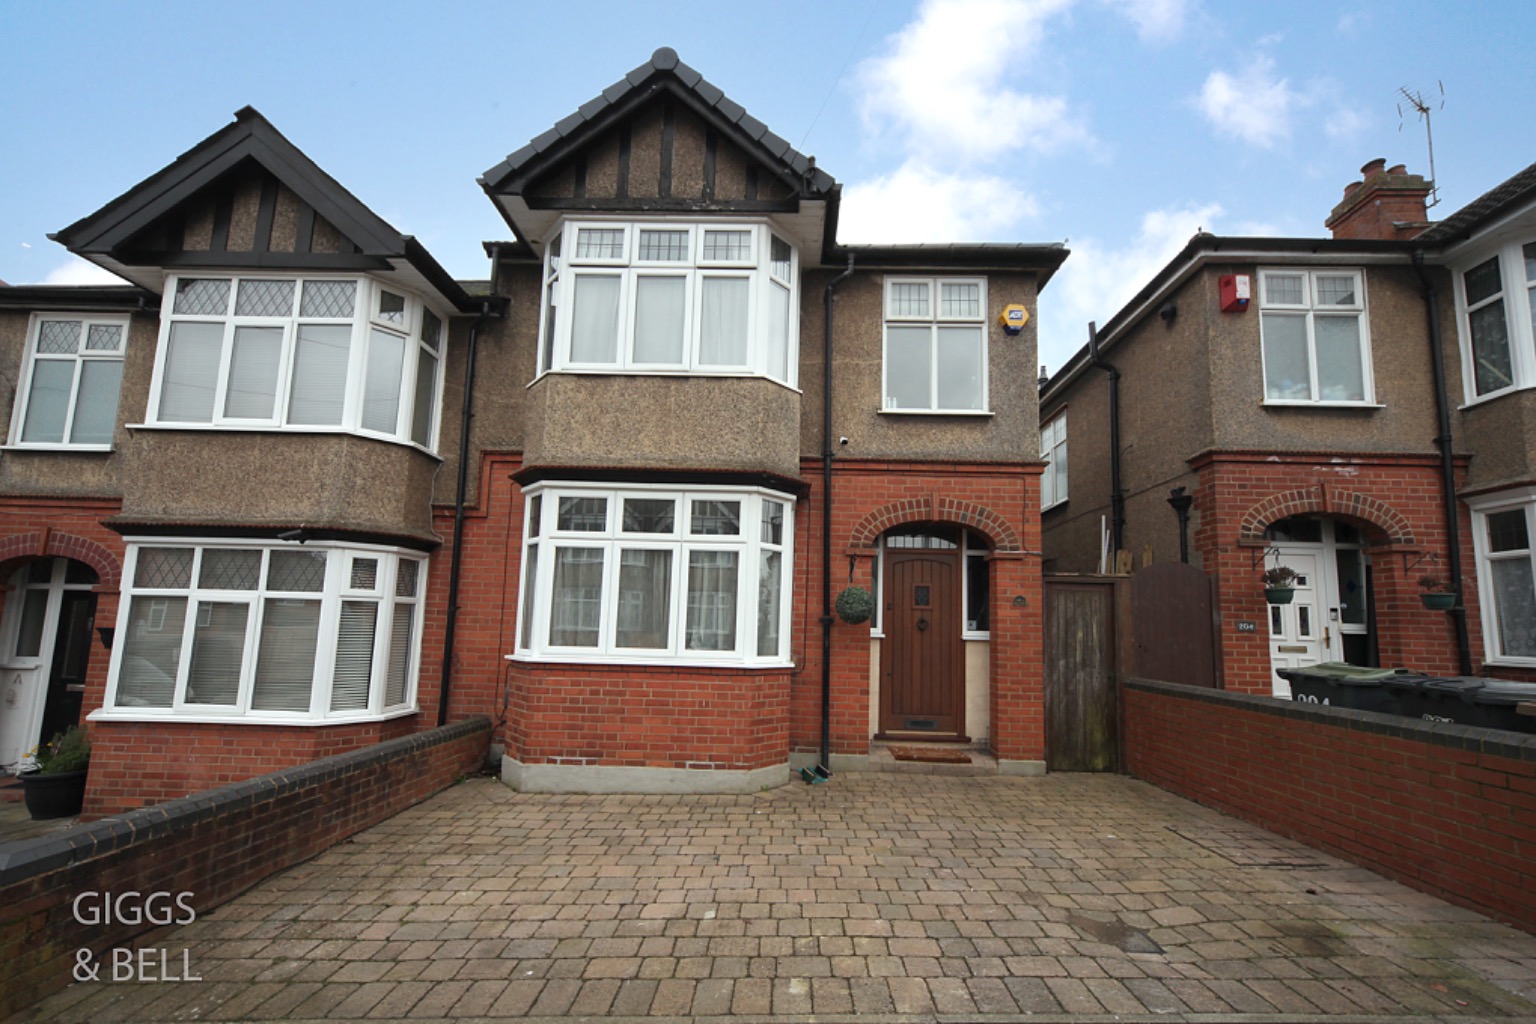 3 bed semi-detached house for sale in Strathmore Avenue, Luton - Property Image 1